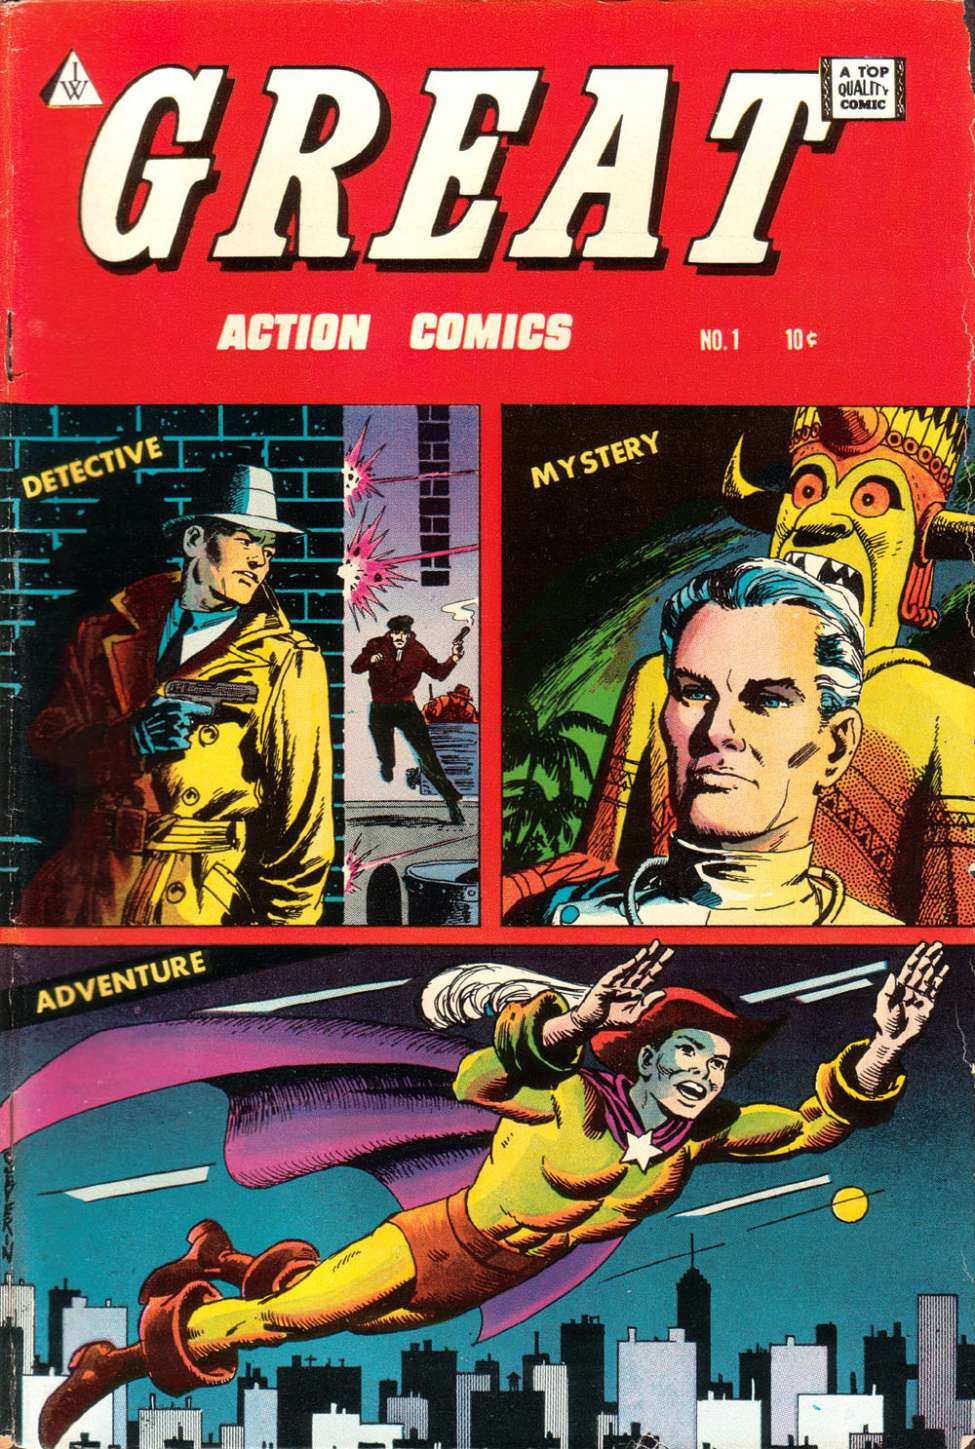 Book Cover For Great Action Comics 1